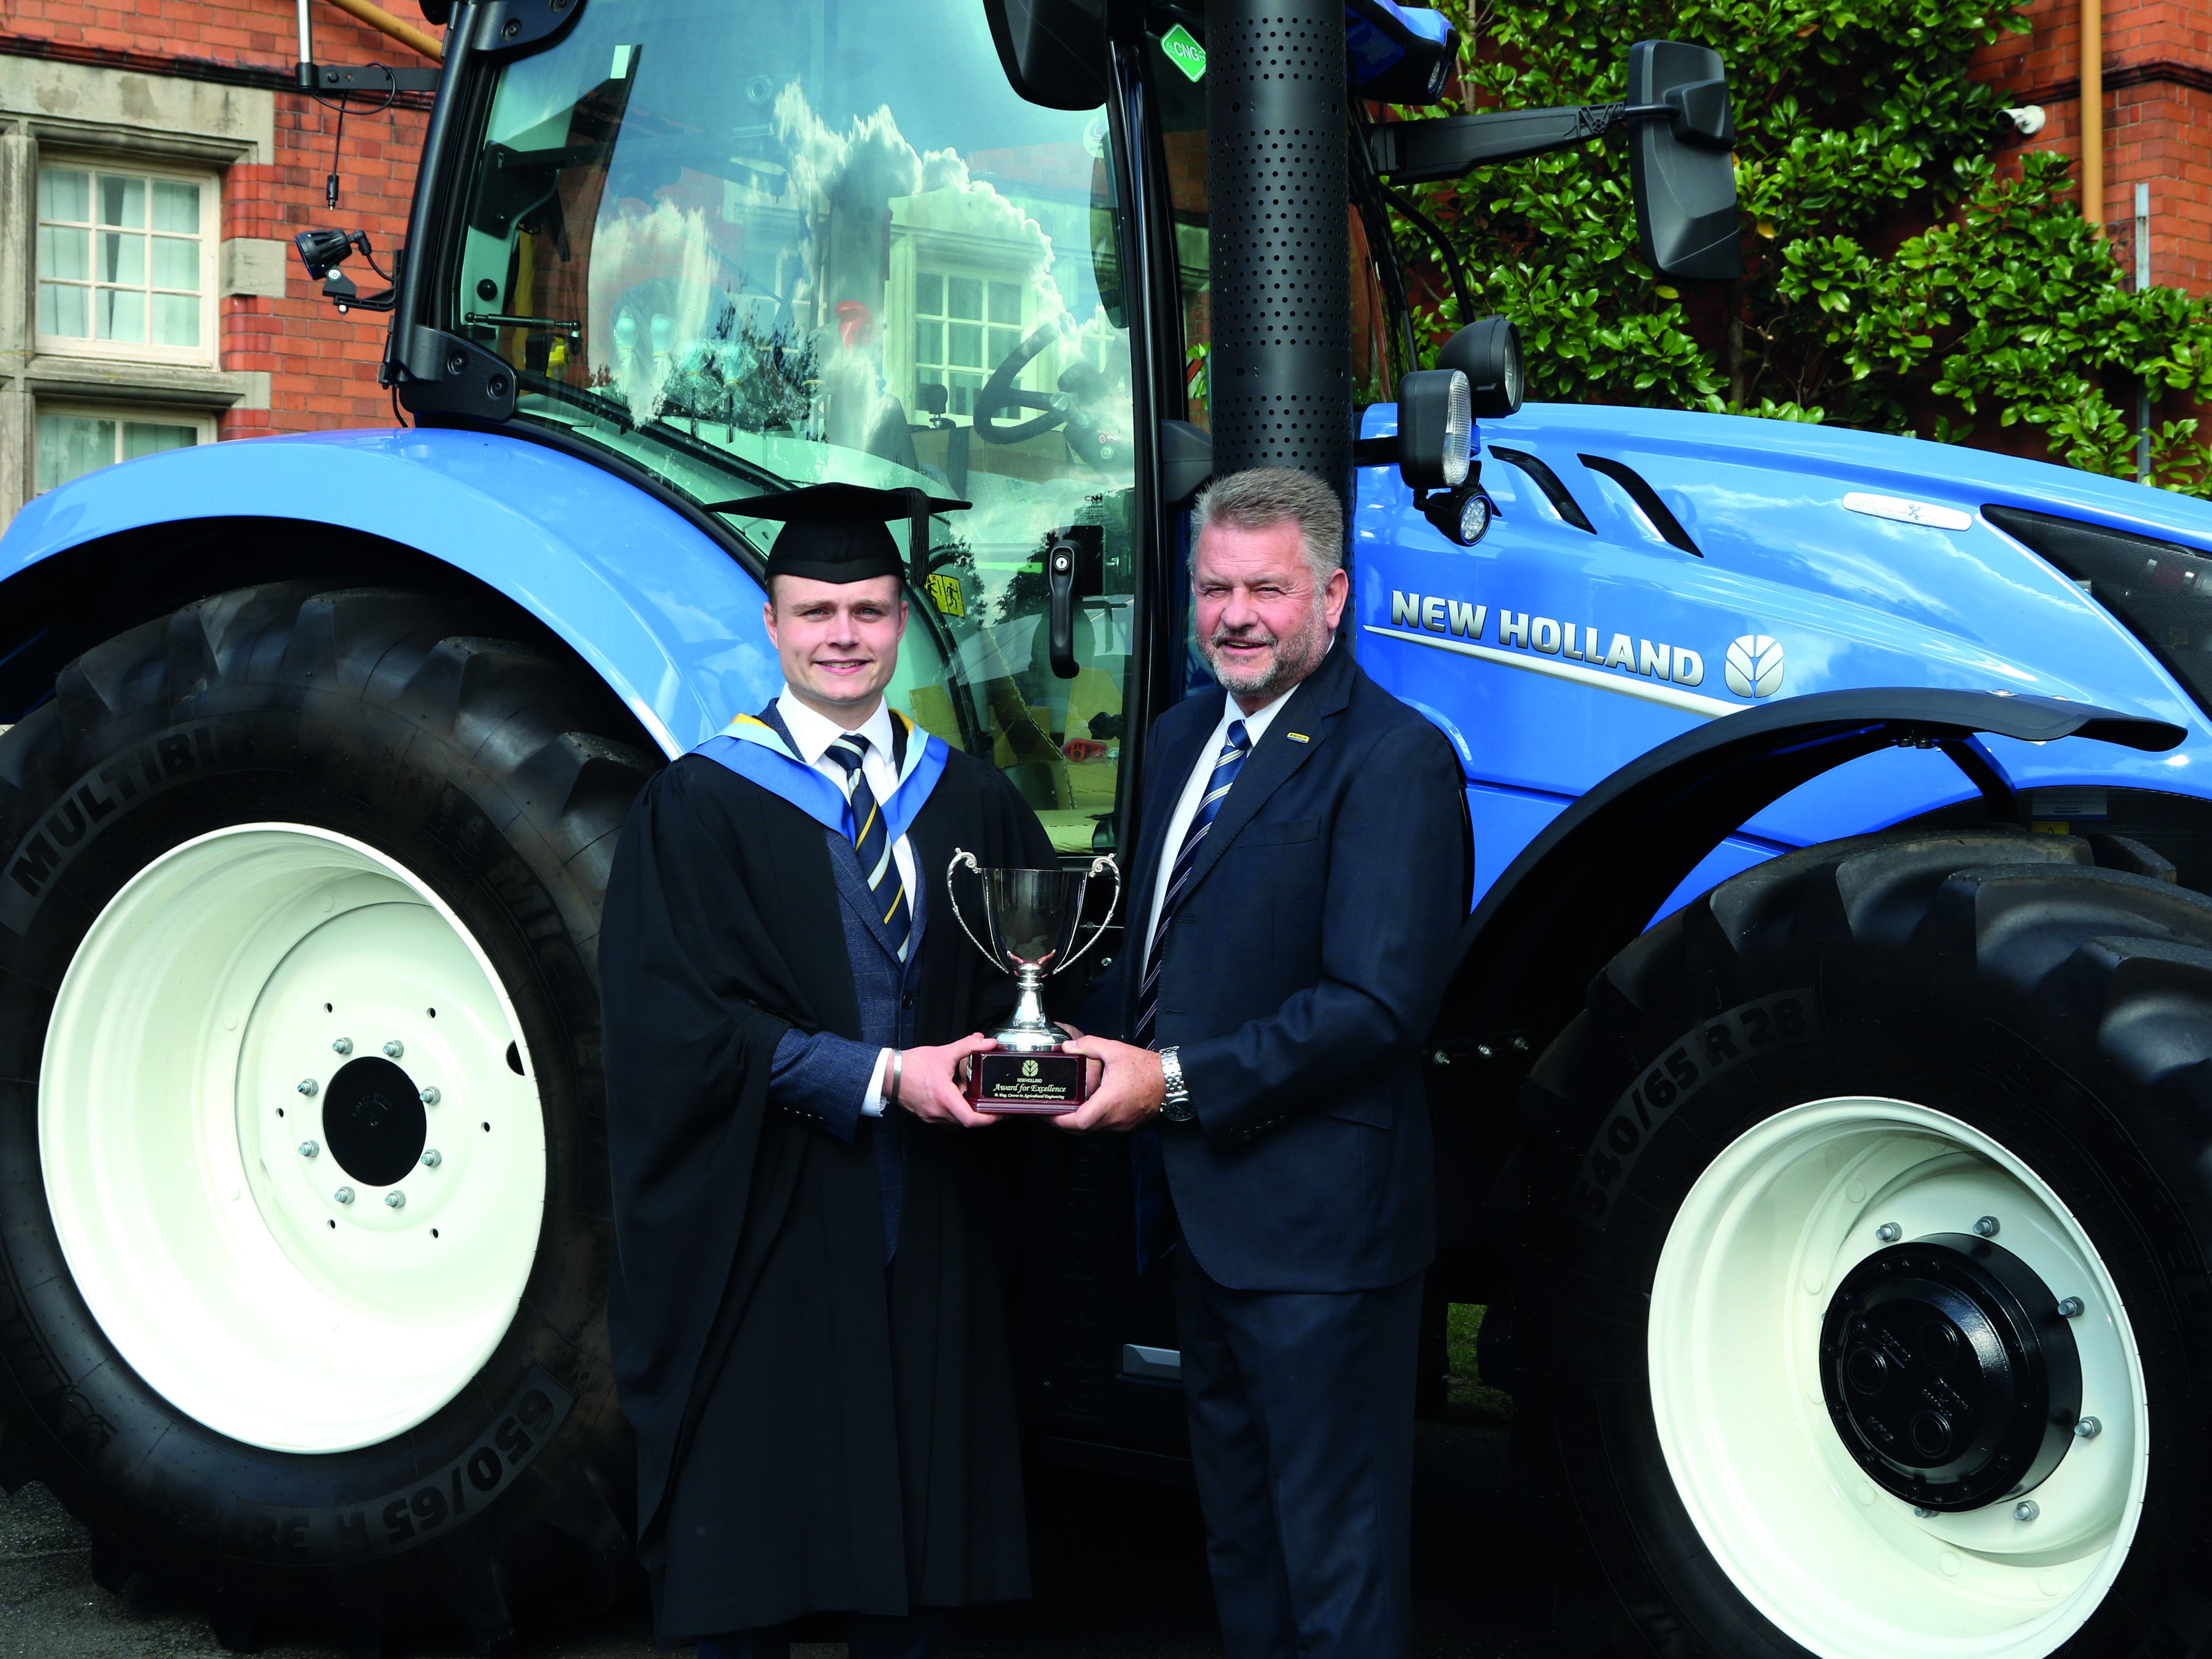 George bags New Holland Agriculture Trophy